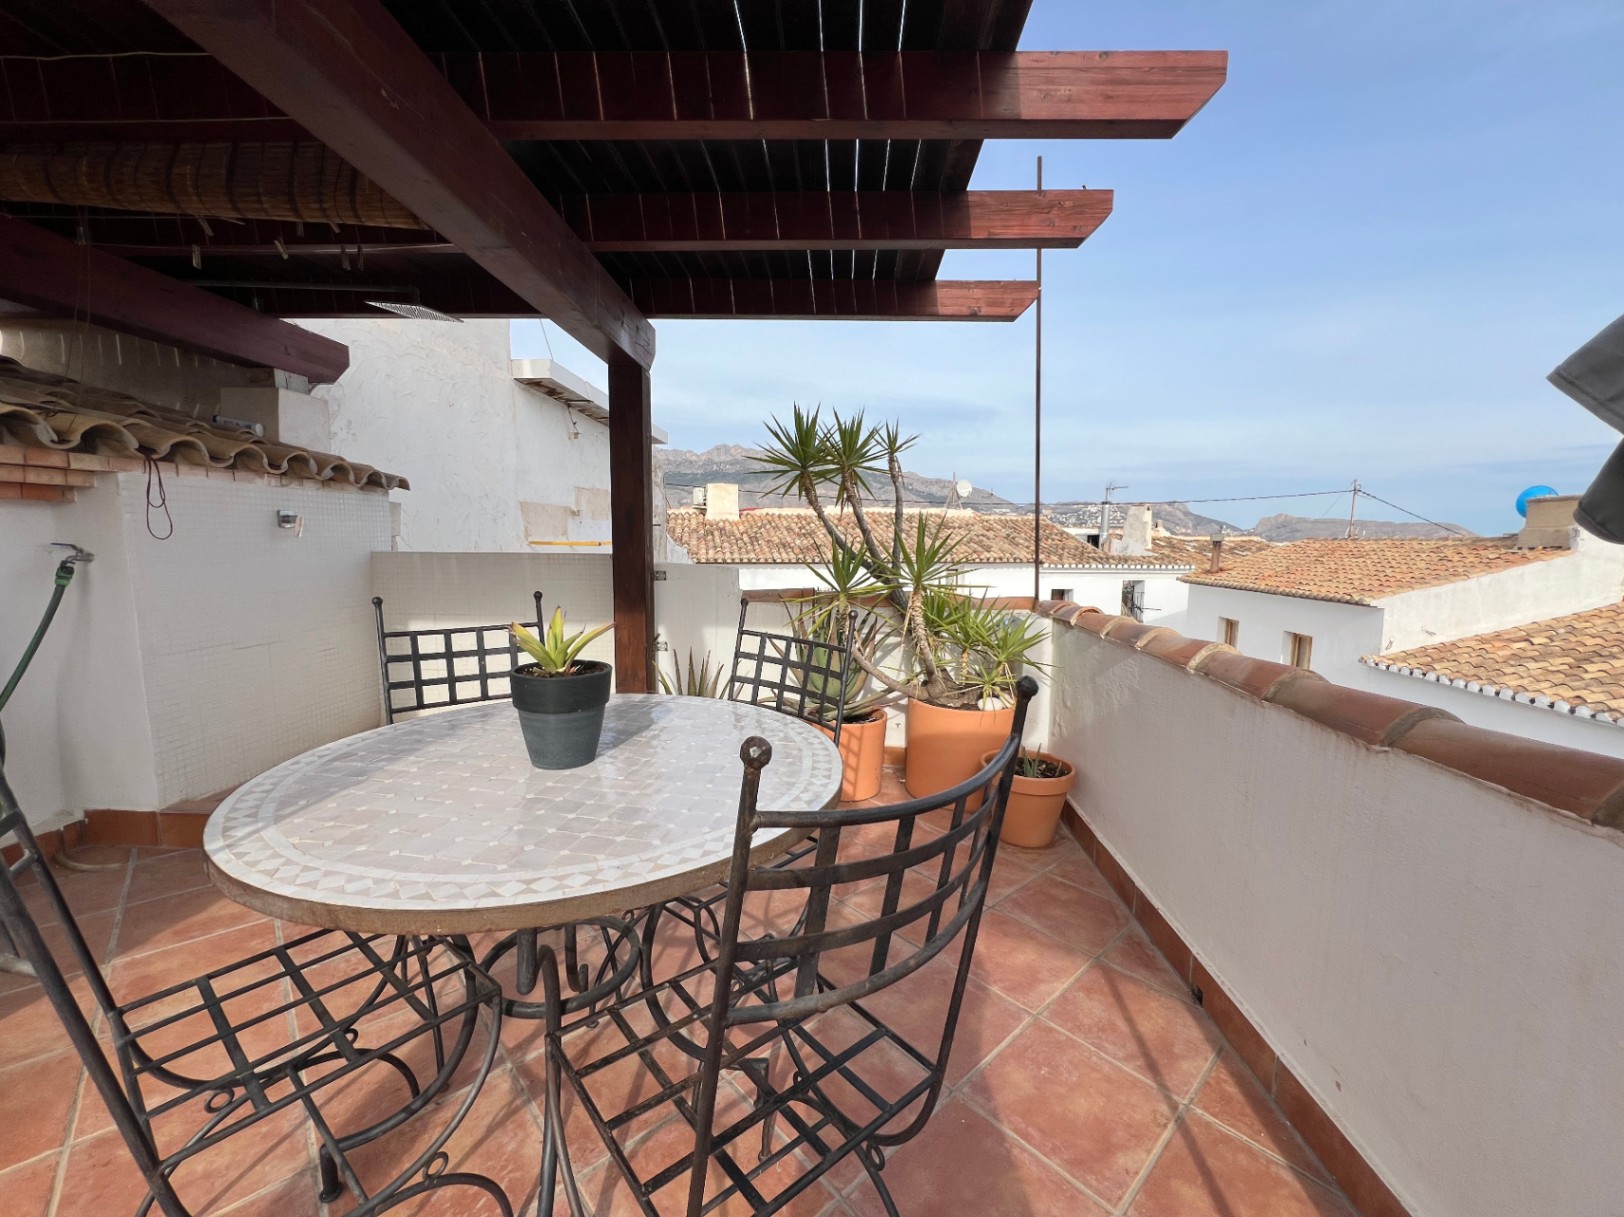 Luxurious Residence in the Historic Old Town of Altea: Discover the Charm of the Past